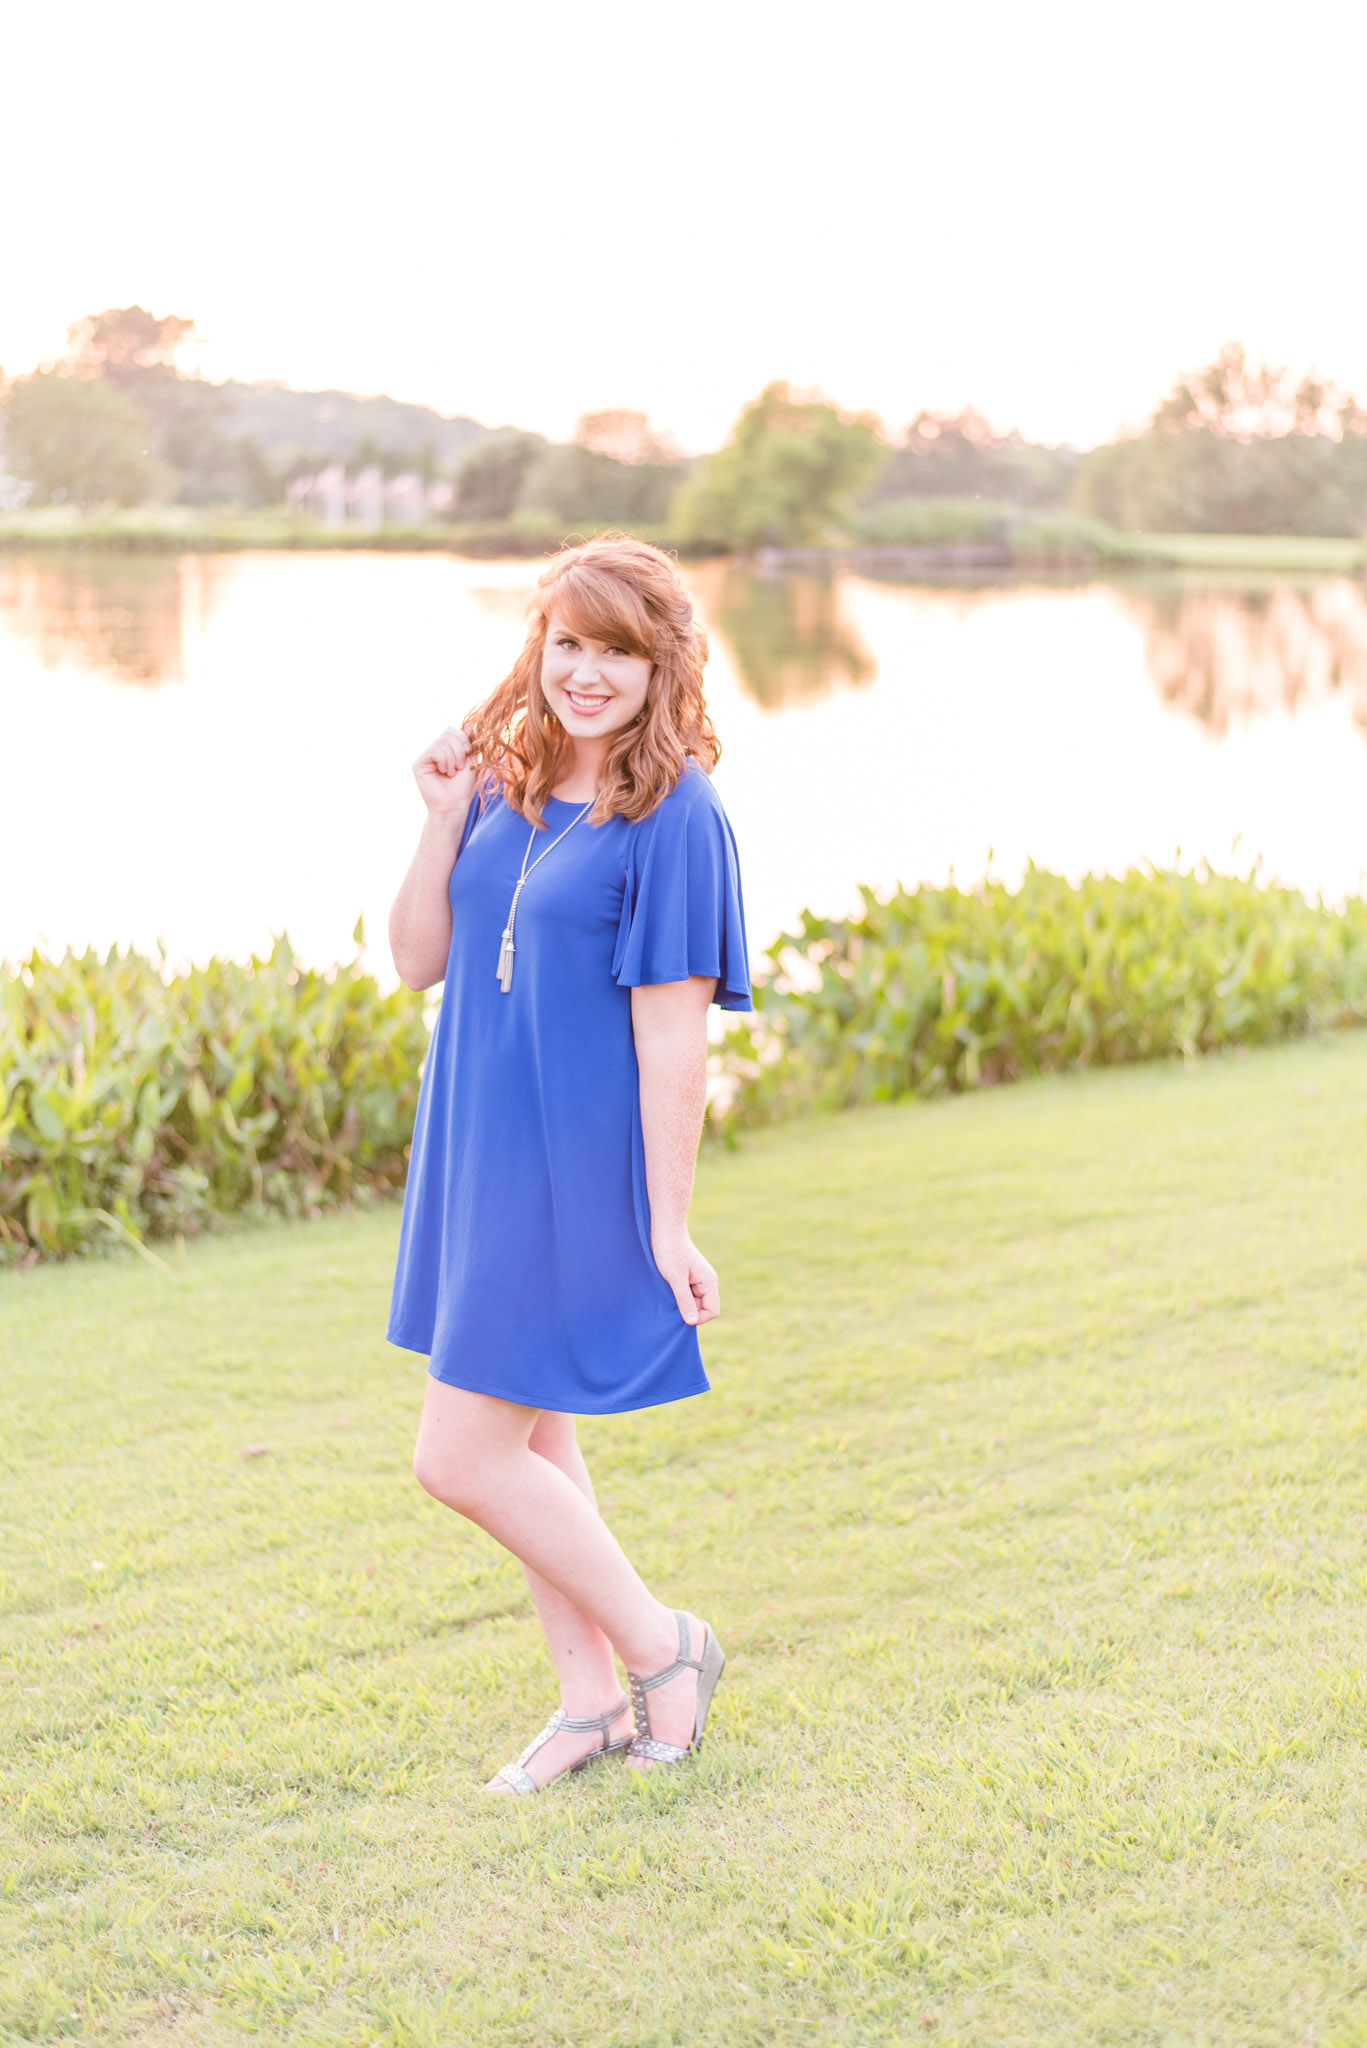 Red-headed senior laughs during pictures